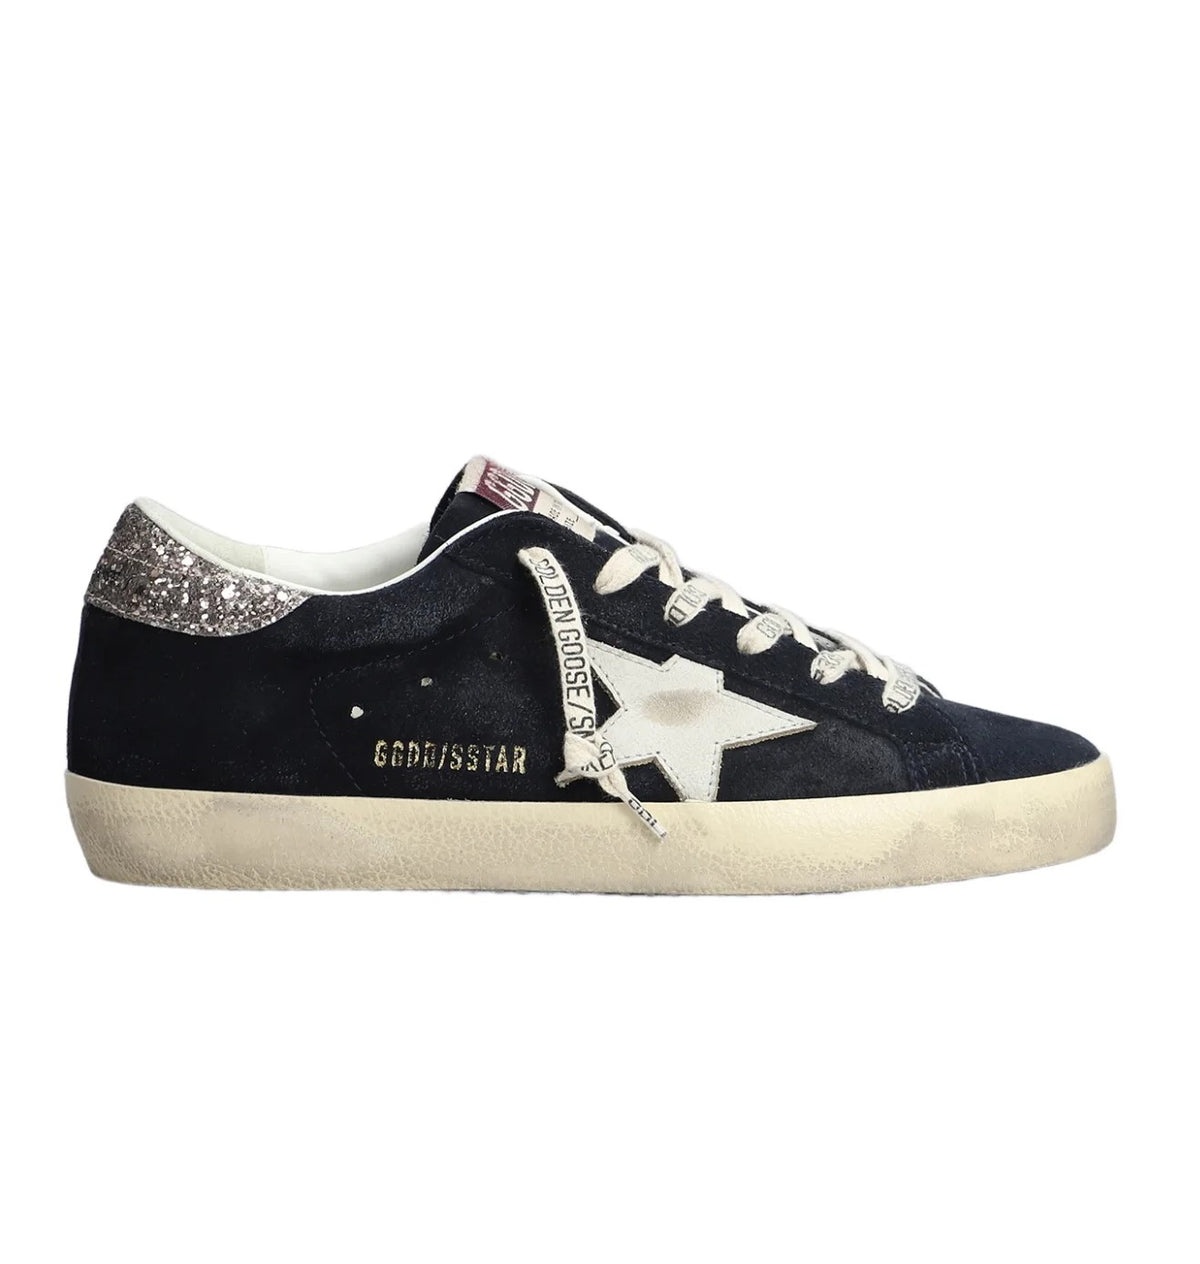 WOMEN'S SUPER-STAR SUEDE SNEAKERS (BLUE/WHITE/SILVER) - 1